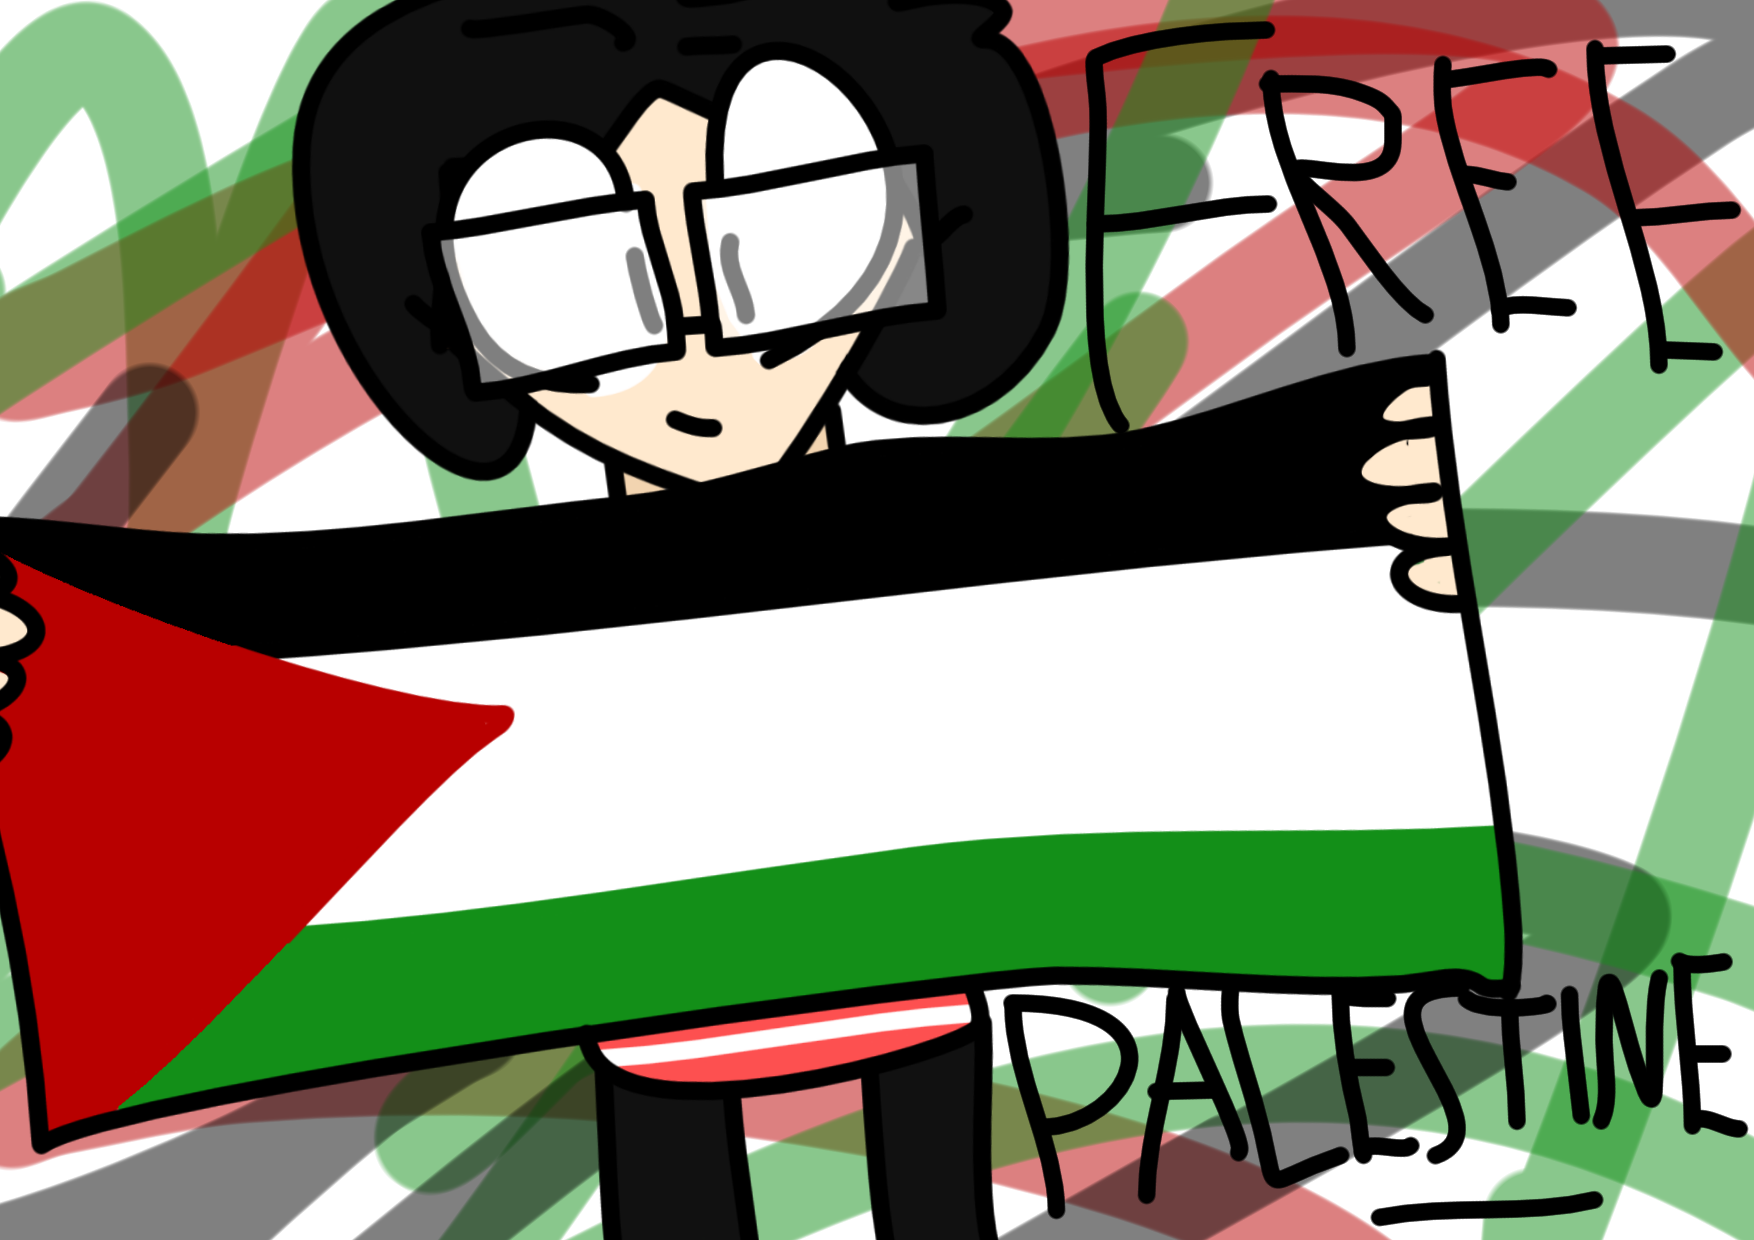 A digital drawing of my sona (a man with black hair, eyeglasses, red & white striped shirt, and black pants), holding the Palestine flag with his two hands, smiling. There is writing beside him captioned 'FREE PALESTINE'. The background is squiggles of the colors that represent Palestine's flag.